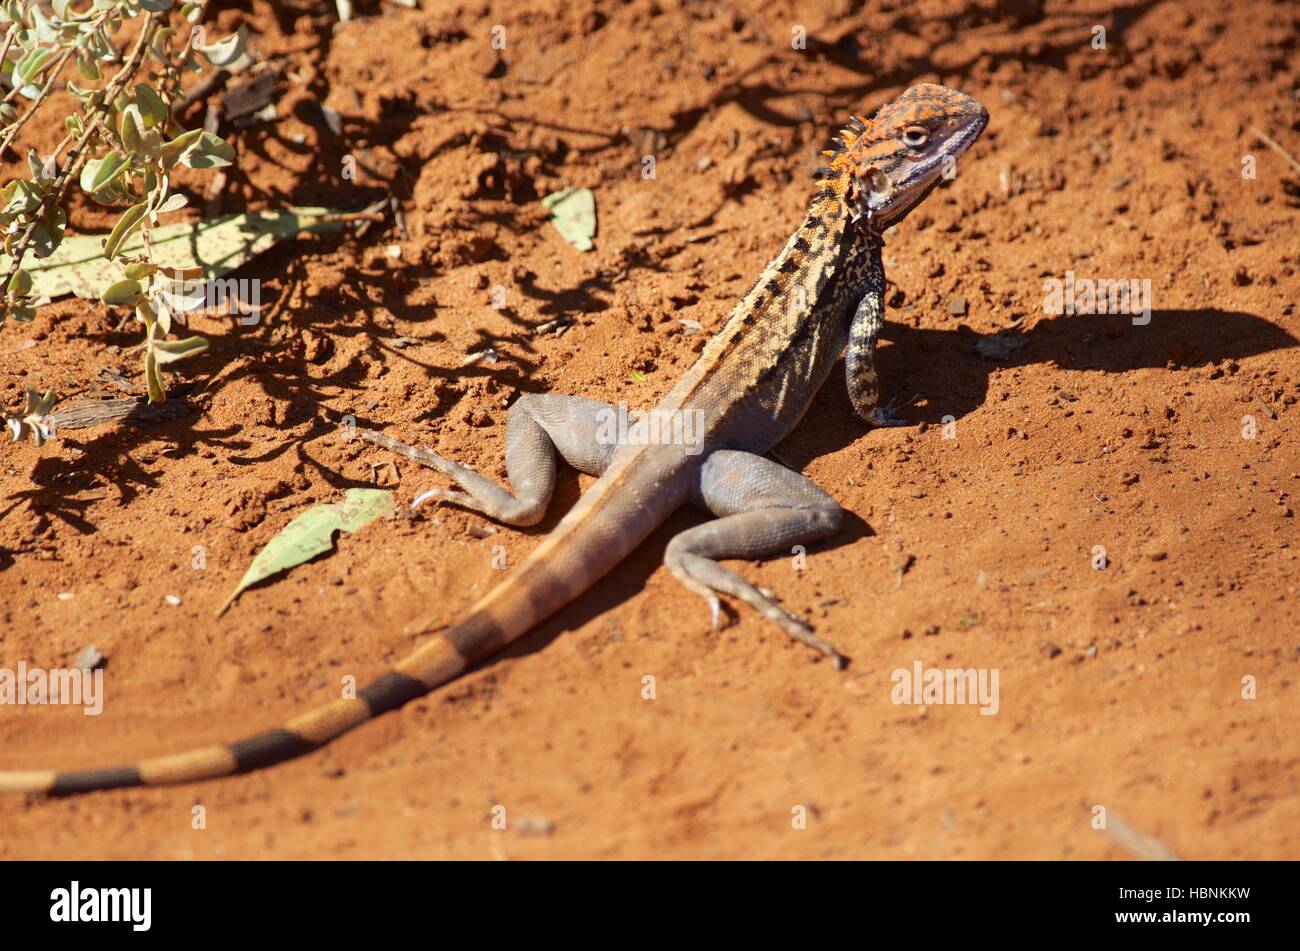 A Crested Dragon (Ctenophorus cristatus) at the edge of a red sand track in Gawler Ranges National Park, South Australia Stock Photo